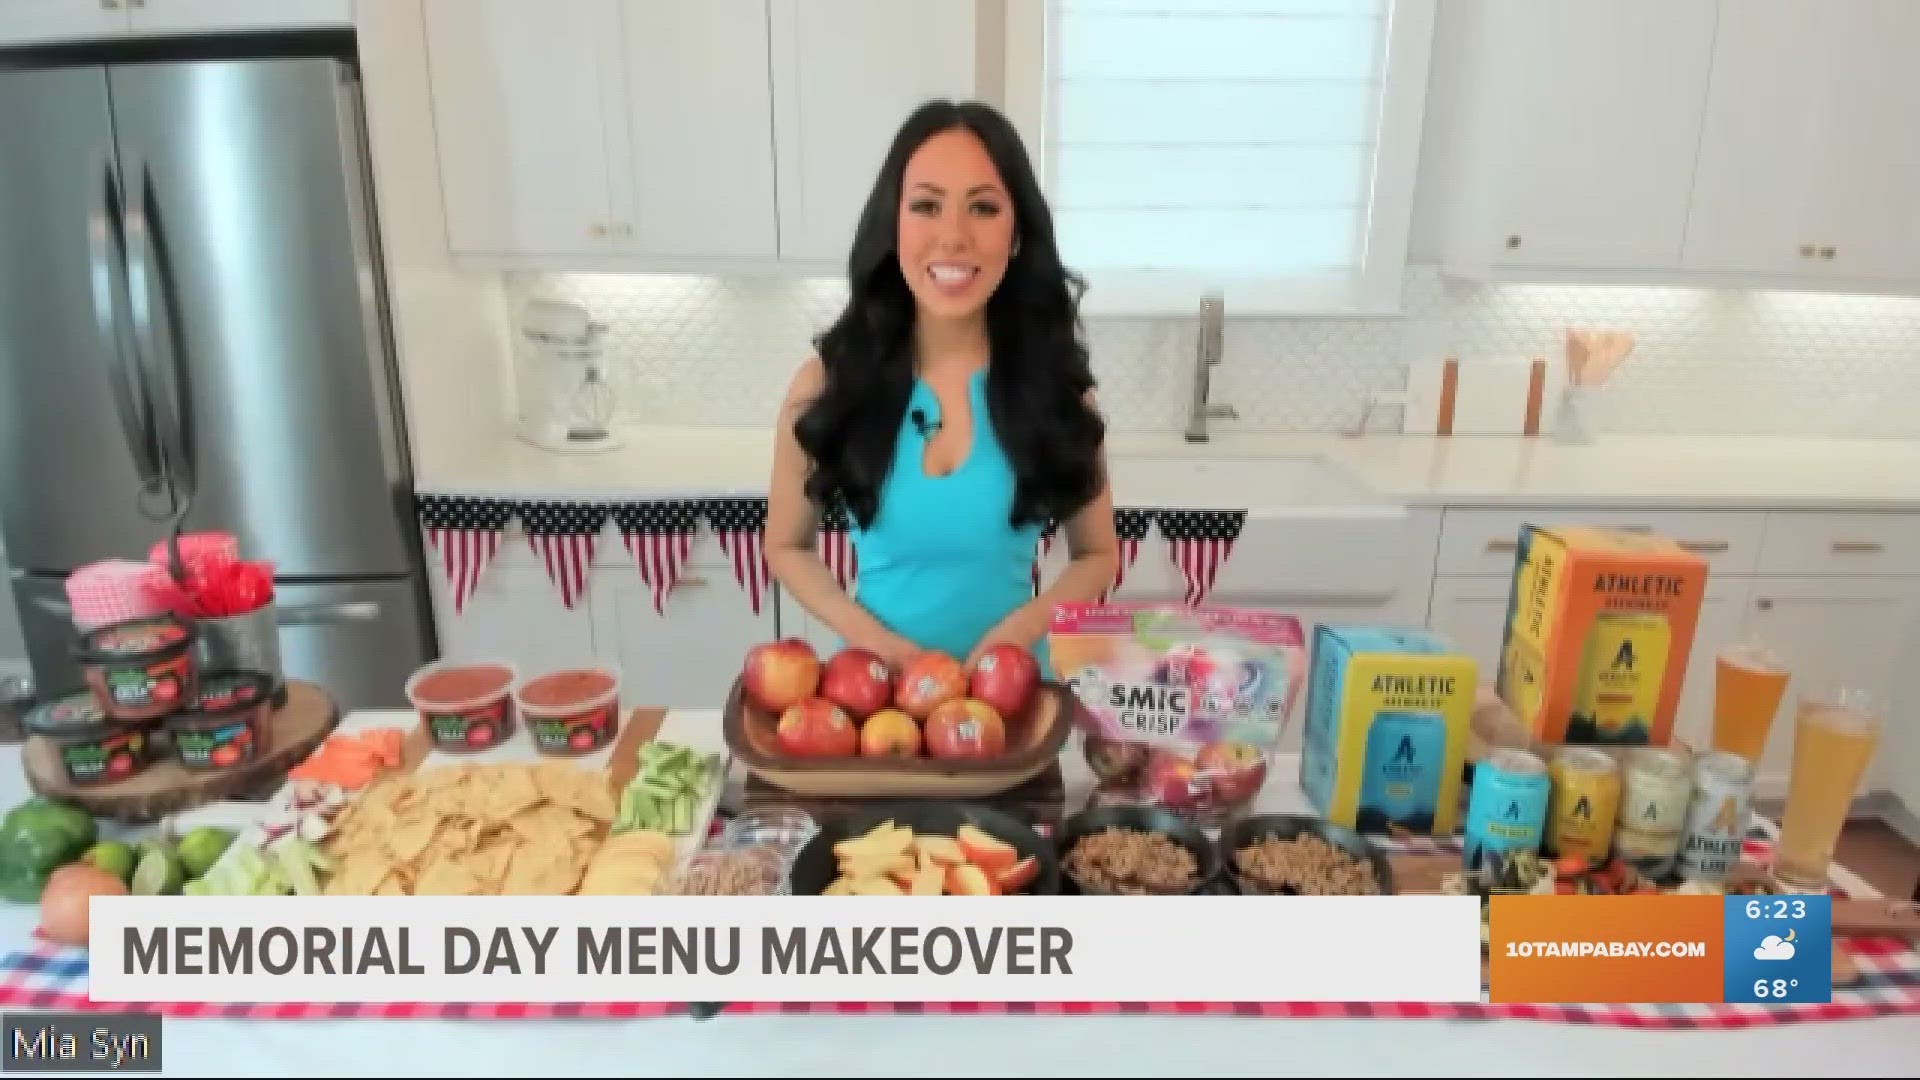 Nutritionist Mia Syn offers delicious alternatives to foods like apple pie, beer and burgers.